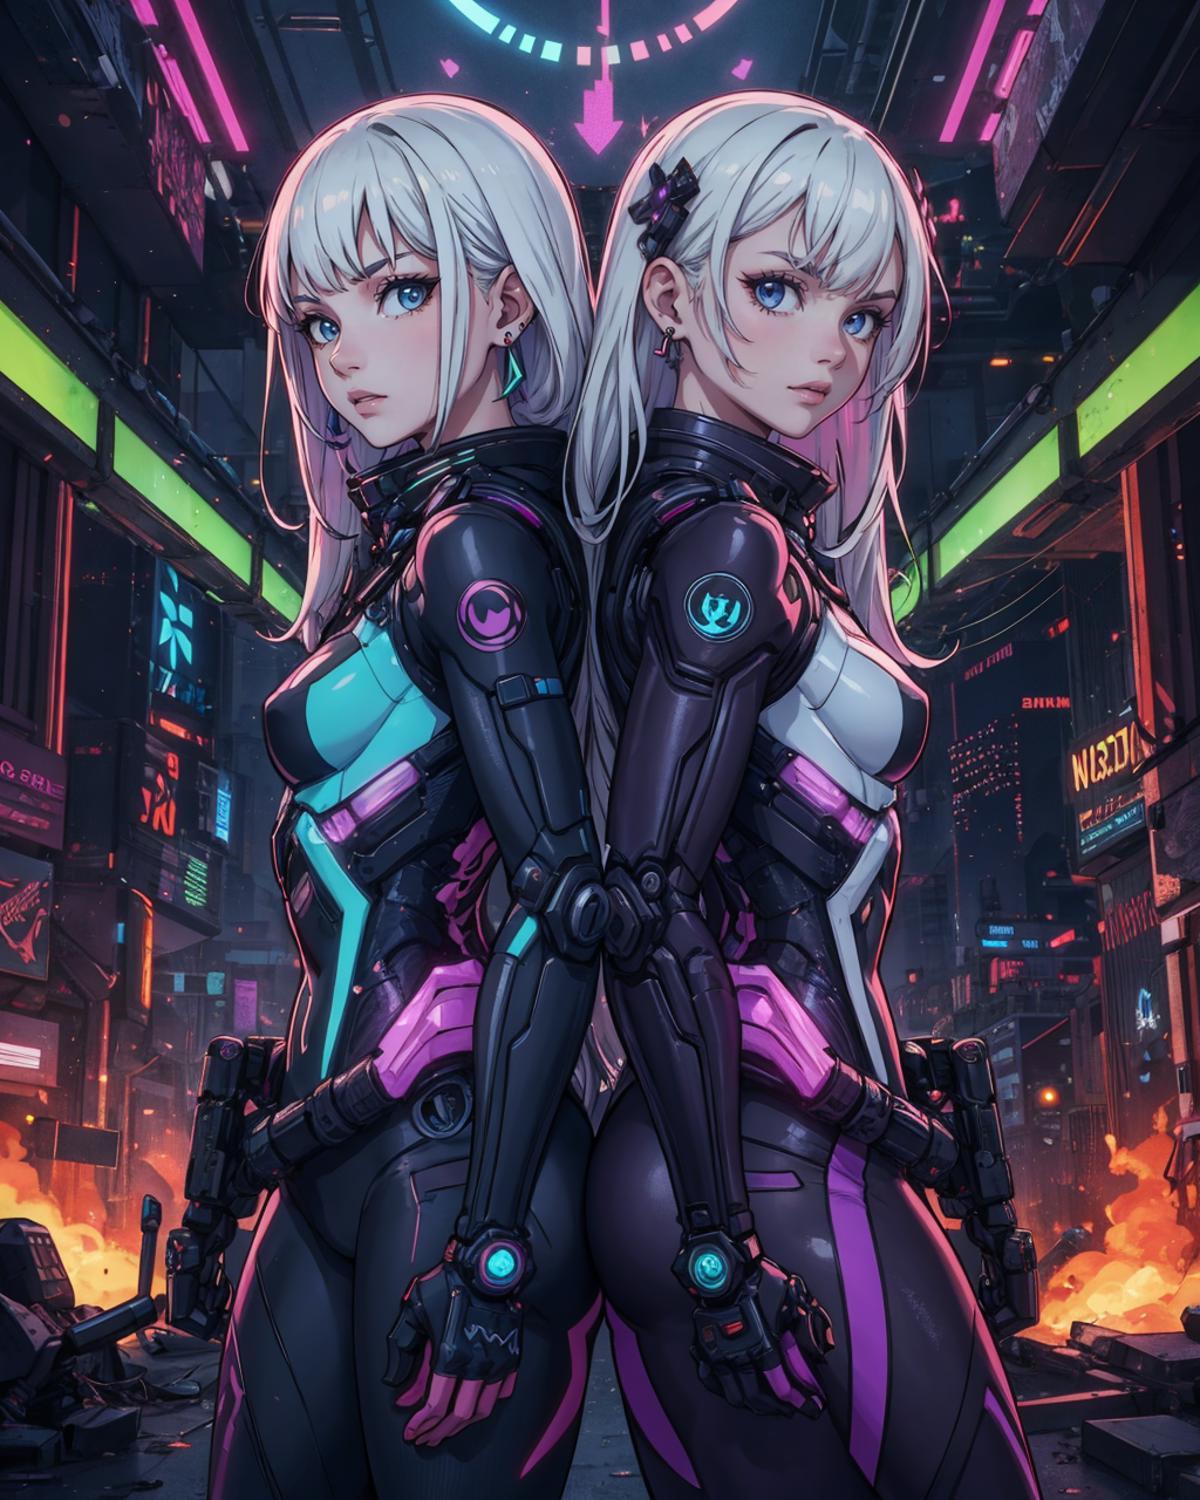 Two women in futuristic outfits holding weapons in a city setting.